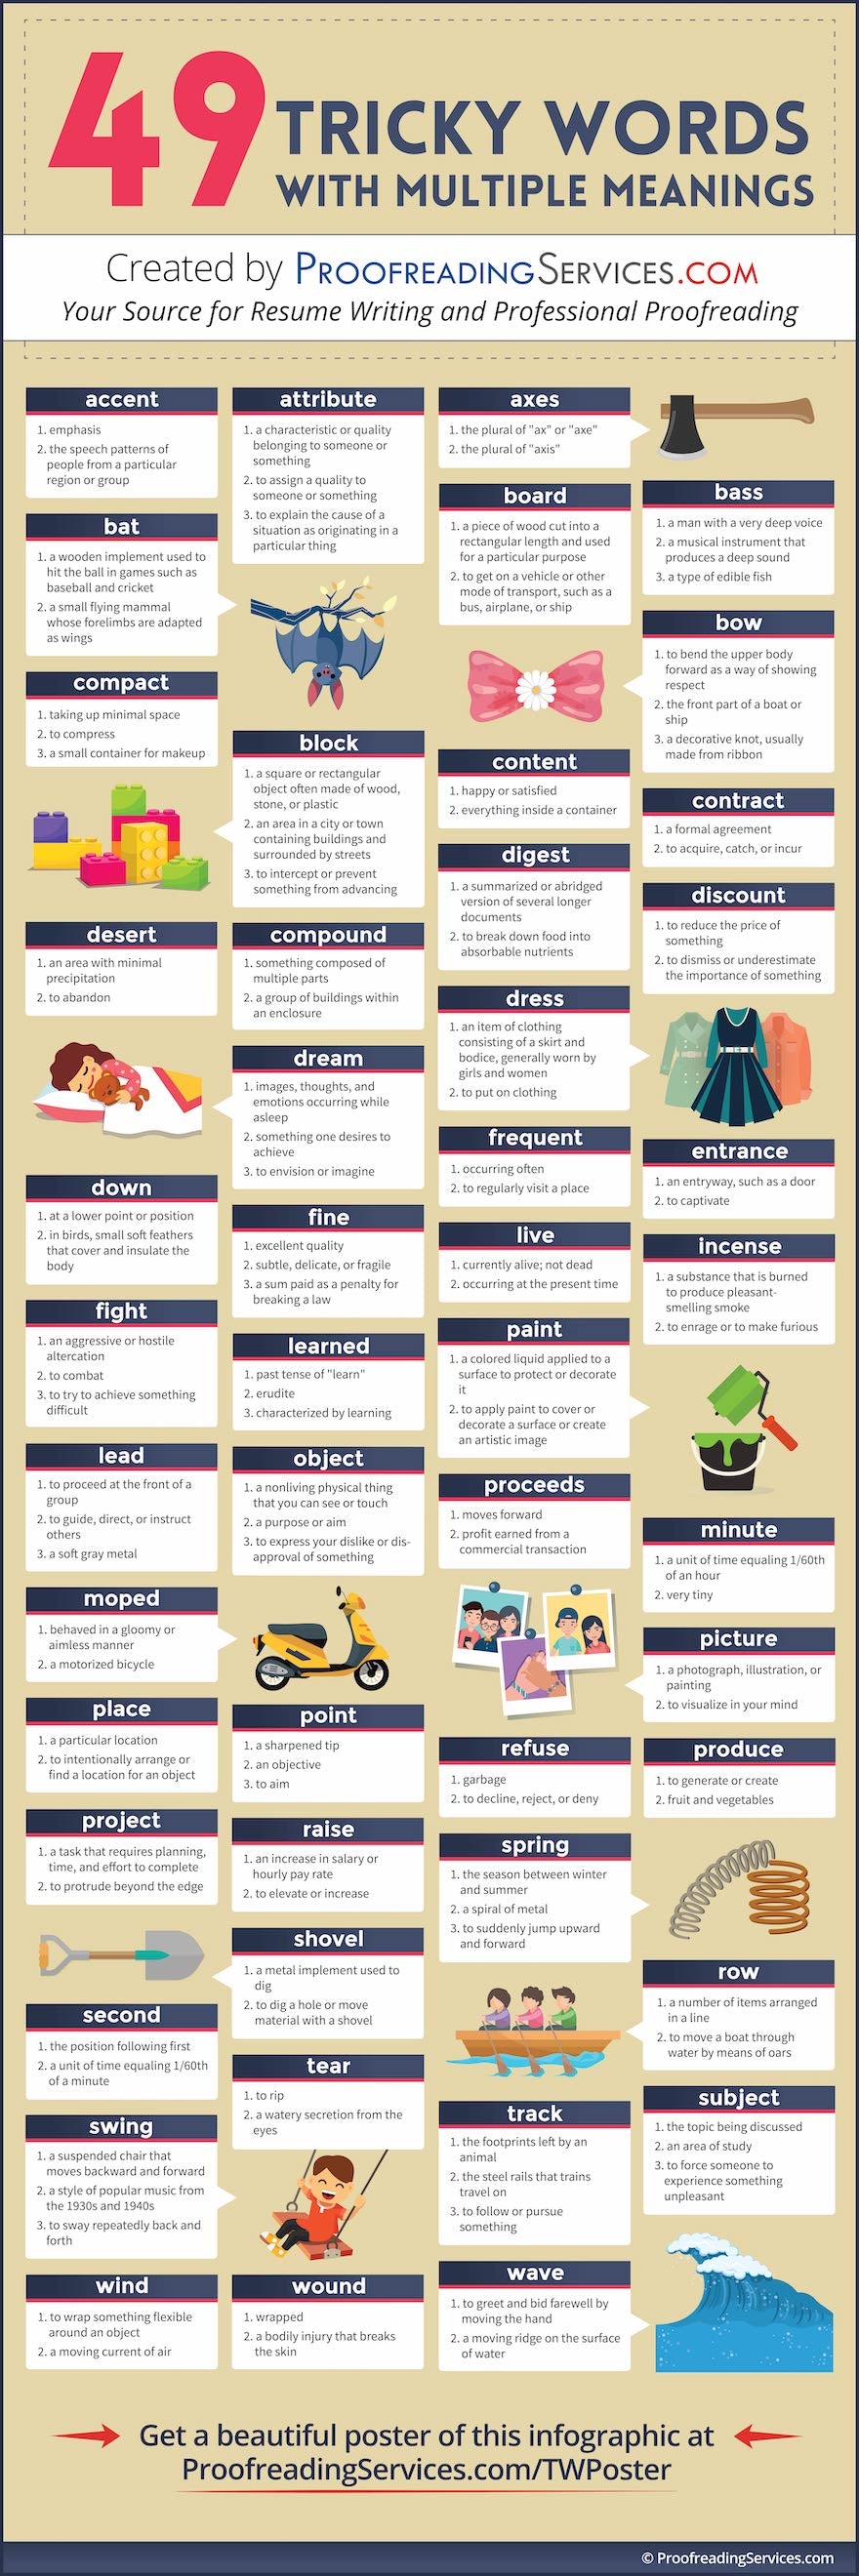 49 Tricky Words with Multiple Meanings infographic